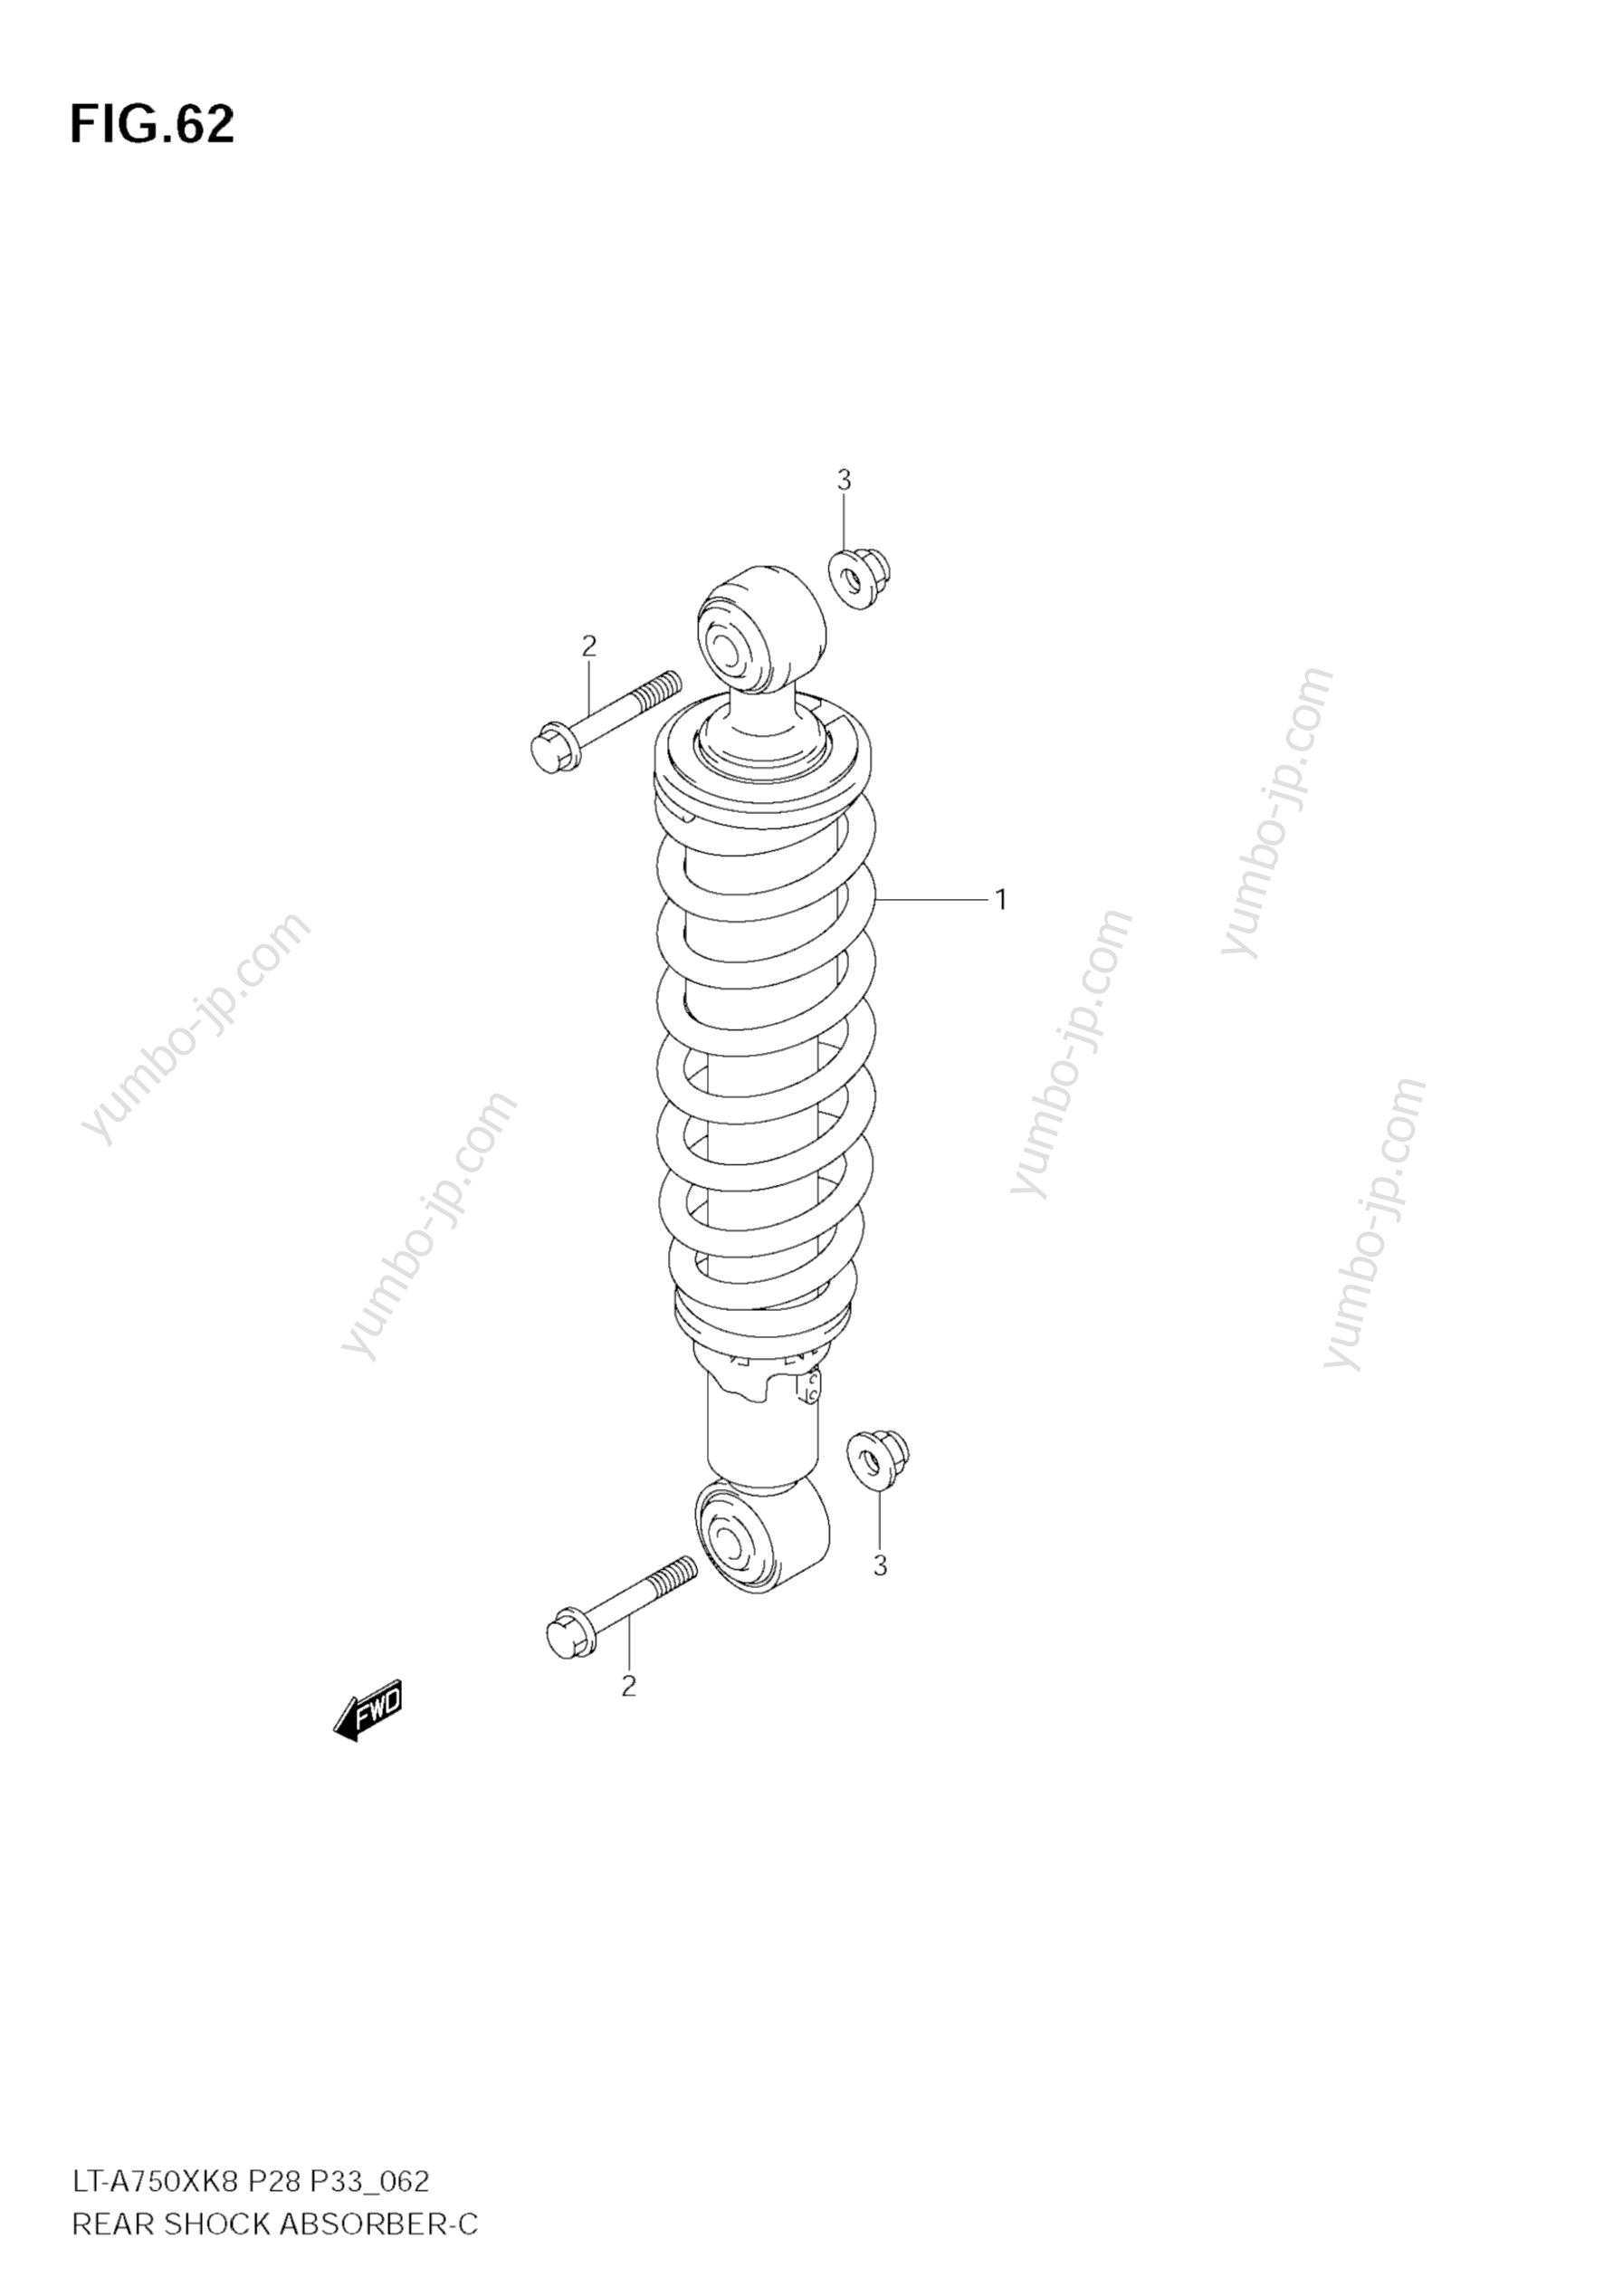 REAR SHOCK ABSORBER for ATVs SUZUKI KingQuad (LT-A750XZ) 2009 year